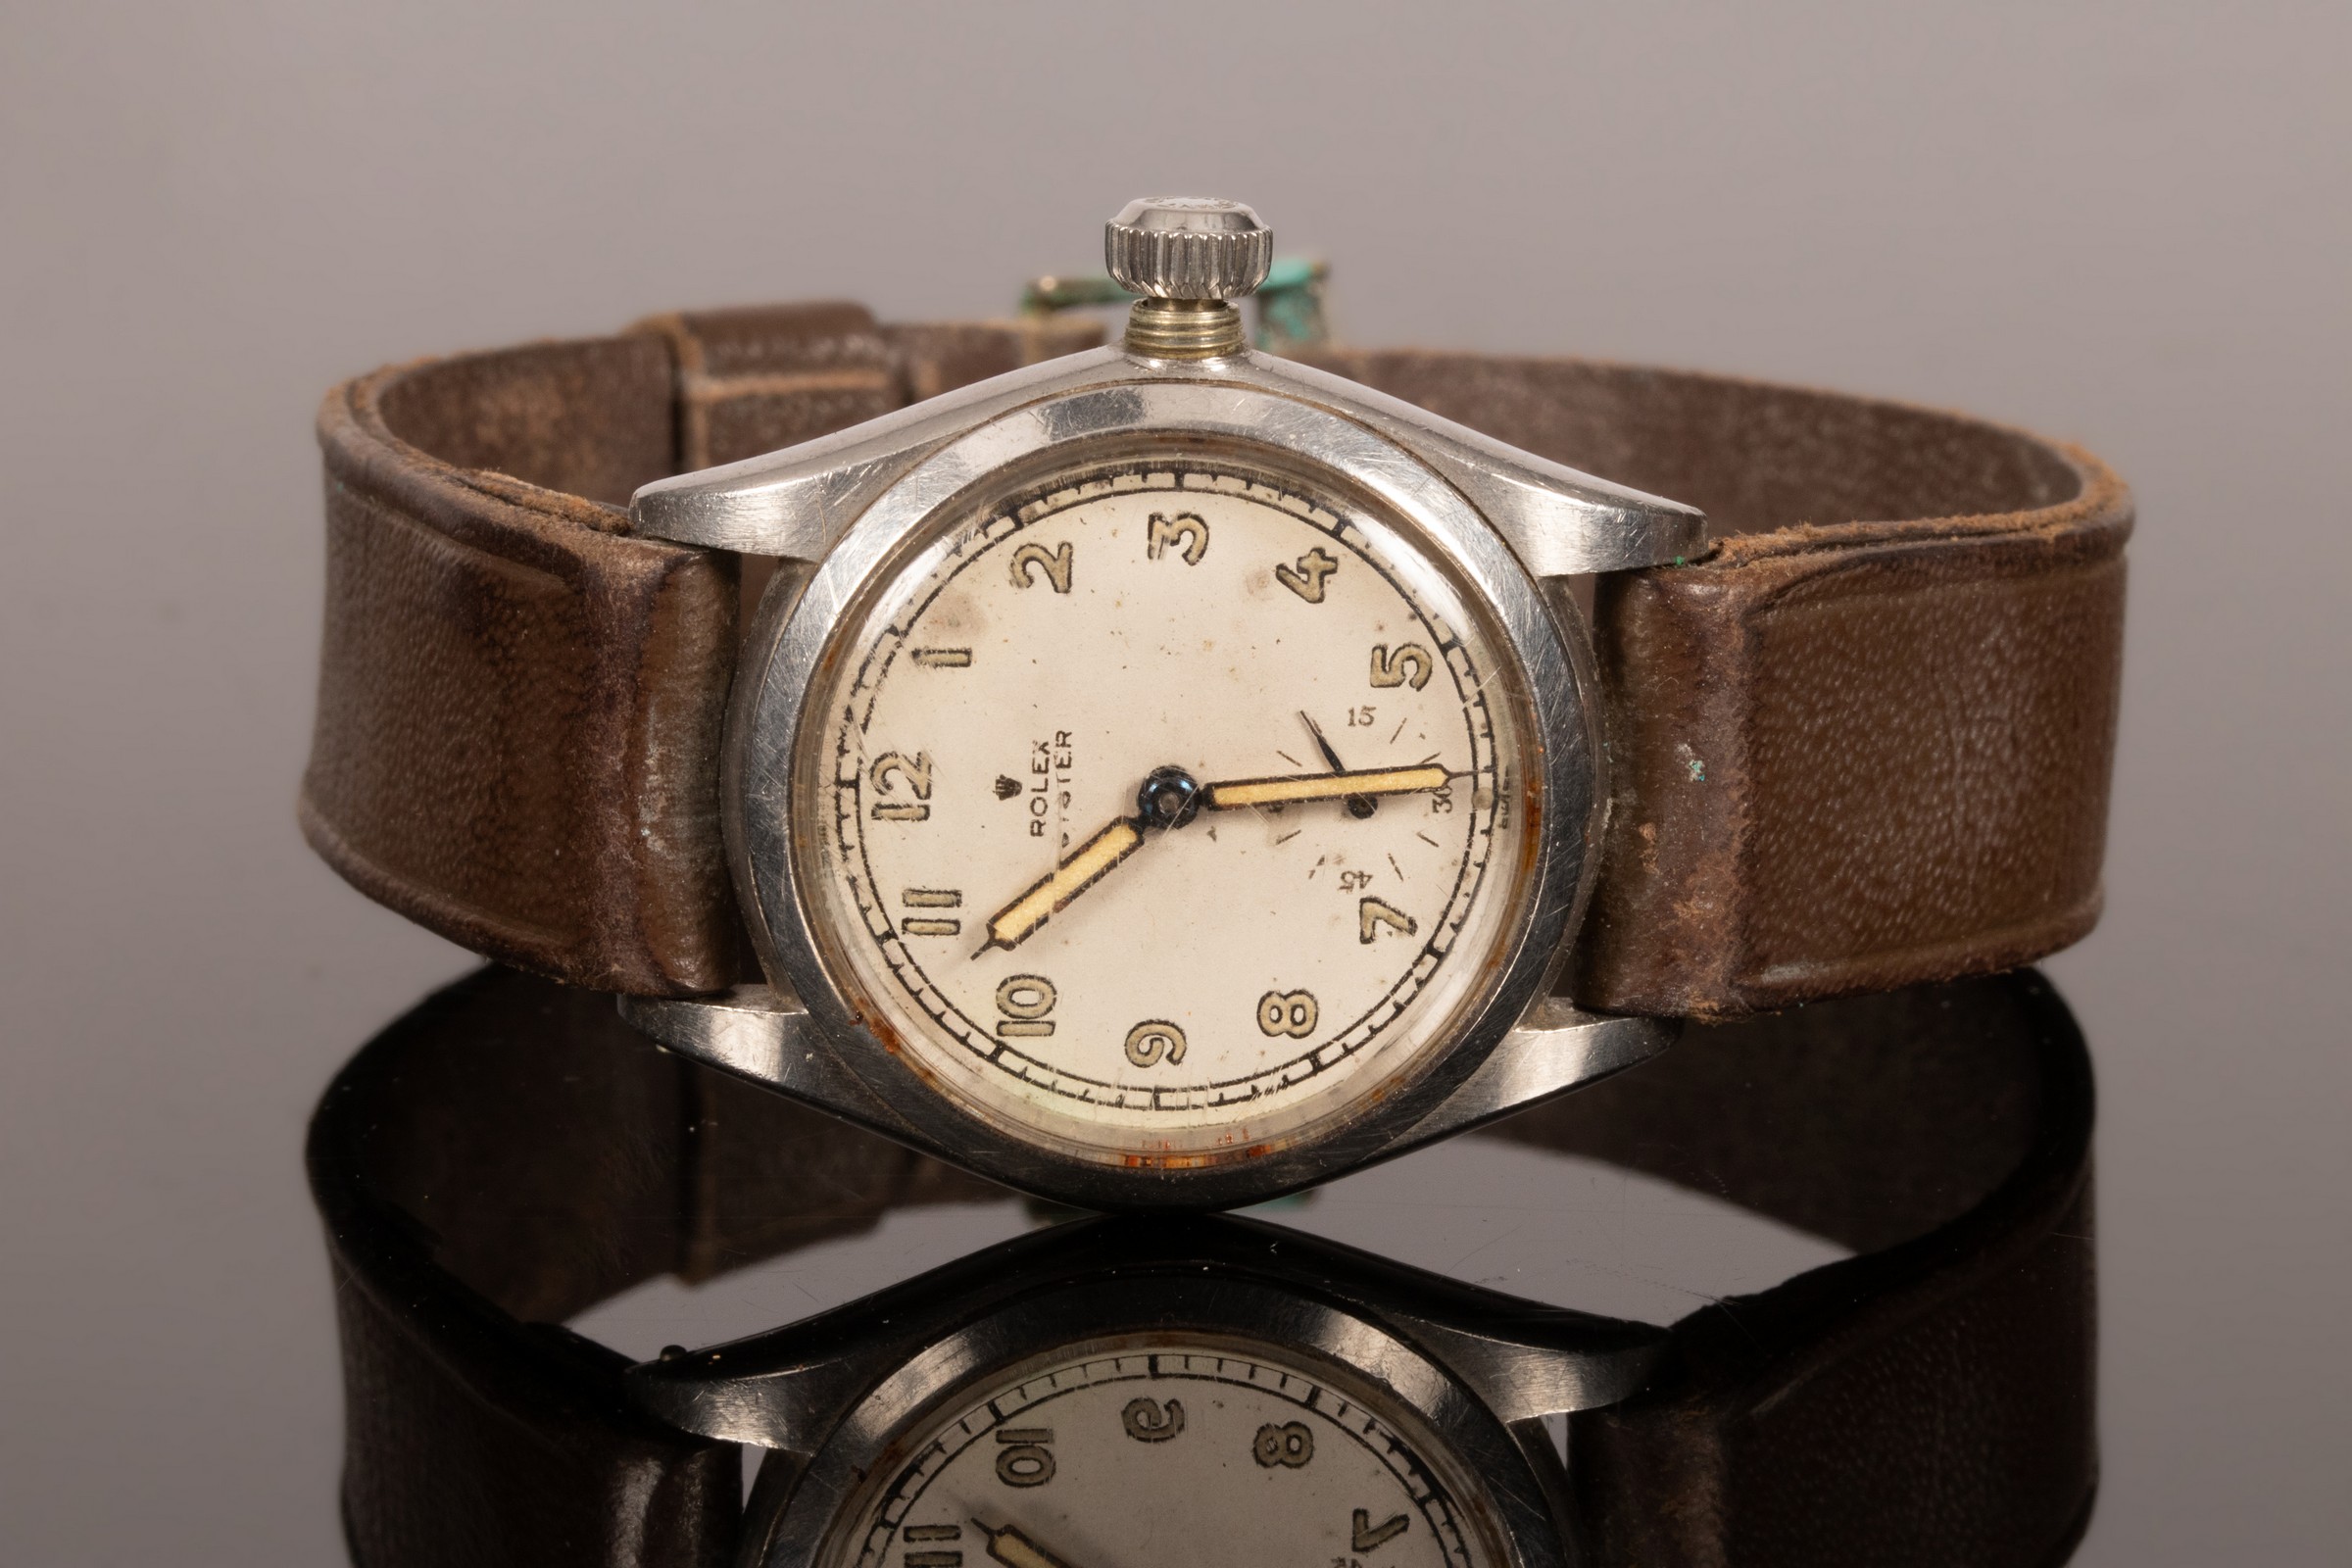 A Rolex Oyster wristwatch, circa 1940s, steel case on leather strap,